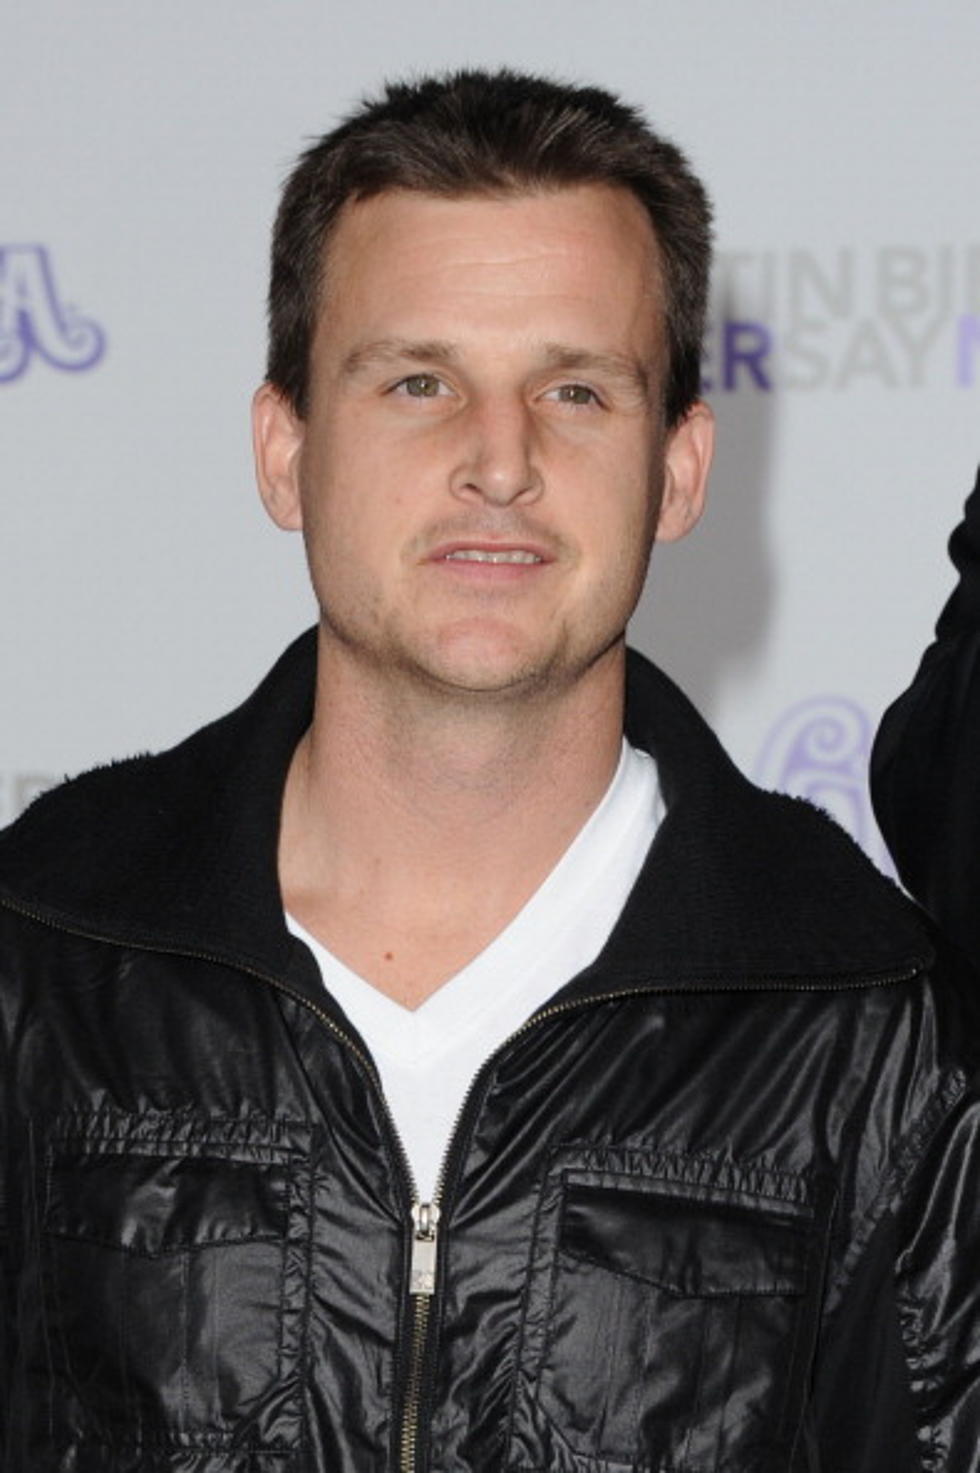 MTV’s Rob Dyrdek Spends $700 On Mega Millions Tickets-How Much Do You Plan To Spend As The Jackpot Continues To Soar